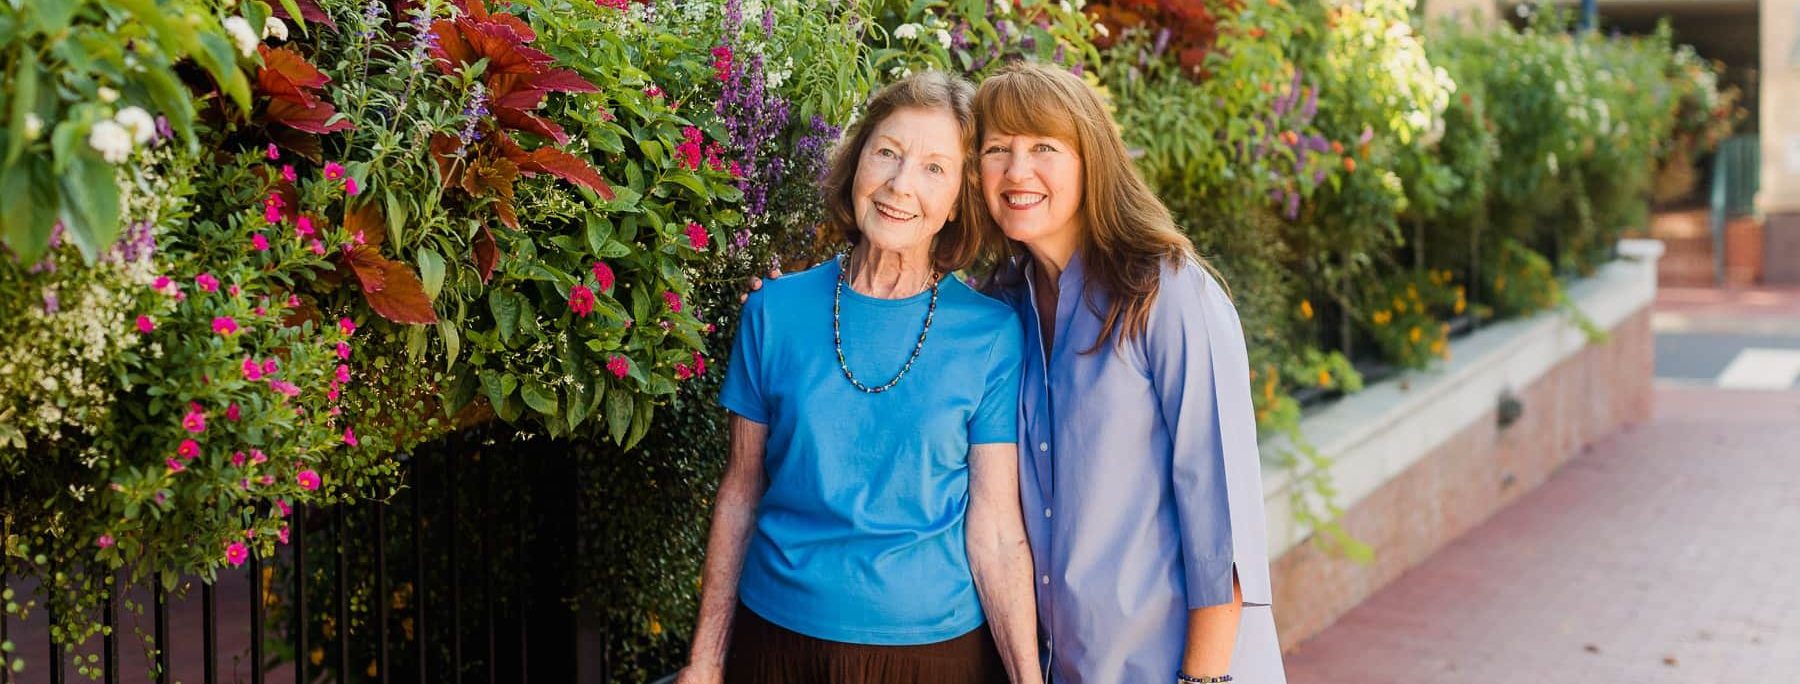 elderly woman and adult daughter smiling in sunshine near wall of flowers